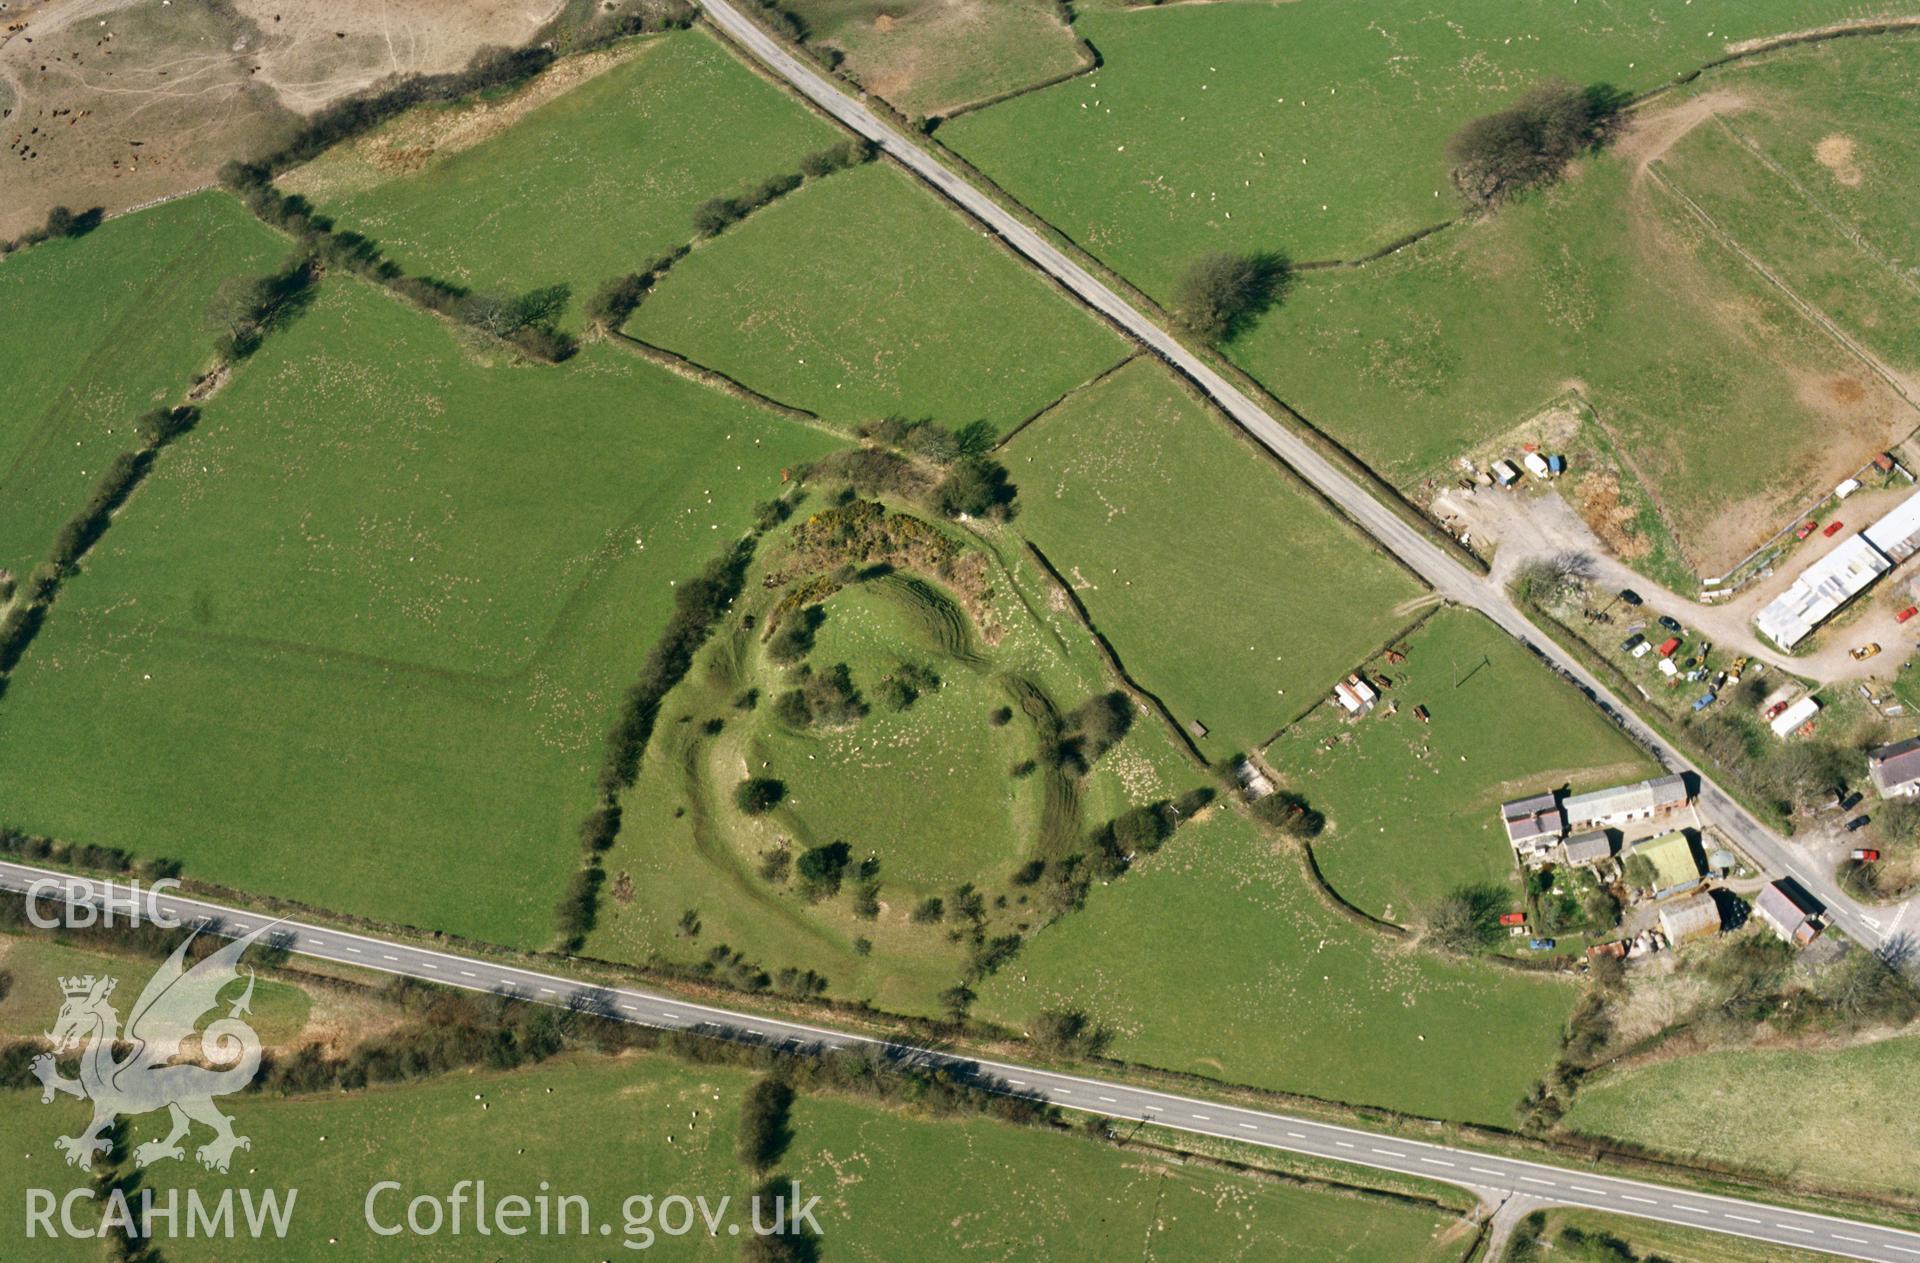 RCAHMW colour oblique aerial photograph of Tomen-y-Rhodwydd, motte and bailey. Taken by Toby Driver on 08/04/2003